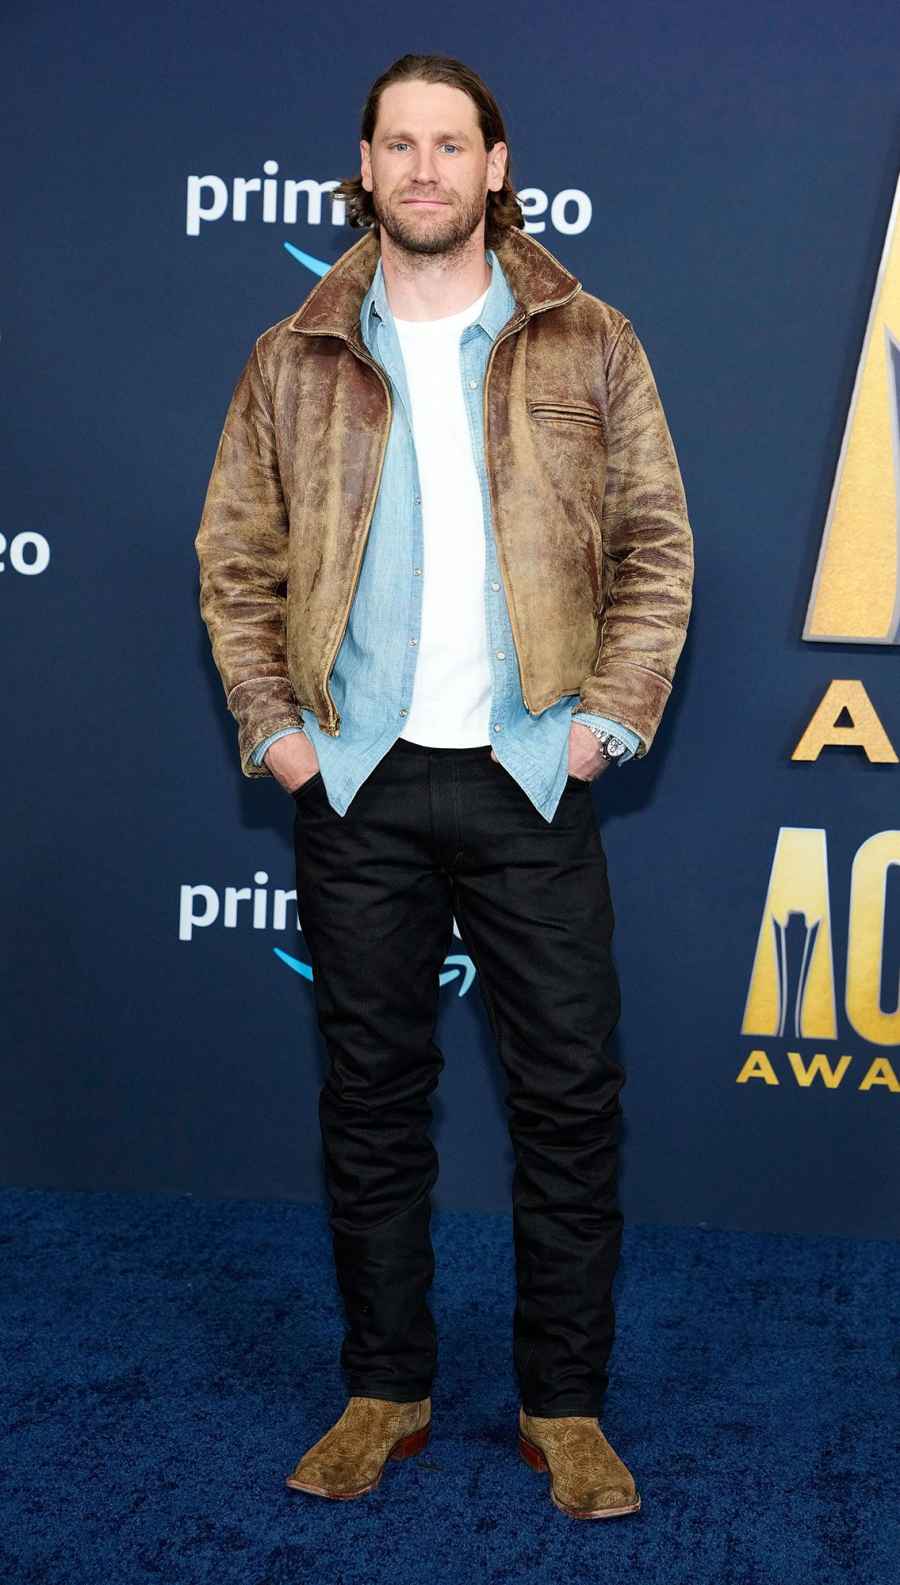 Chase Rice The Best Dressed Hottest Men at the ACM Awards 2022